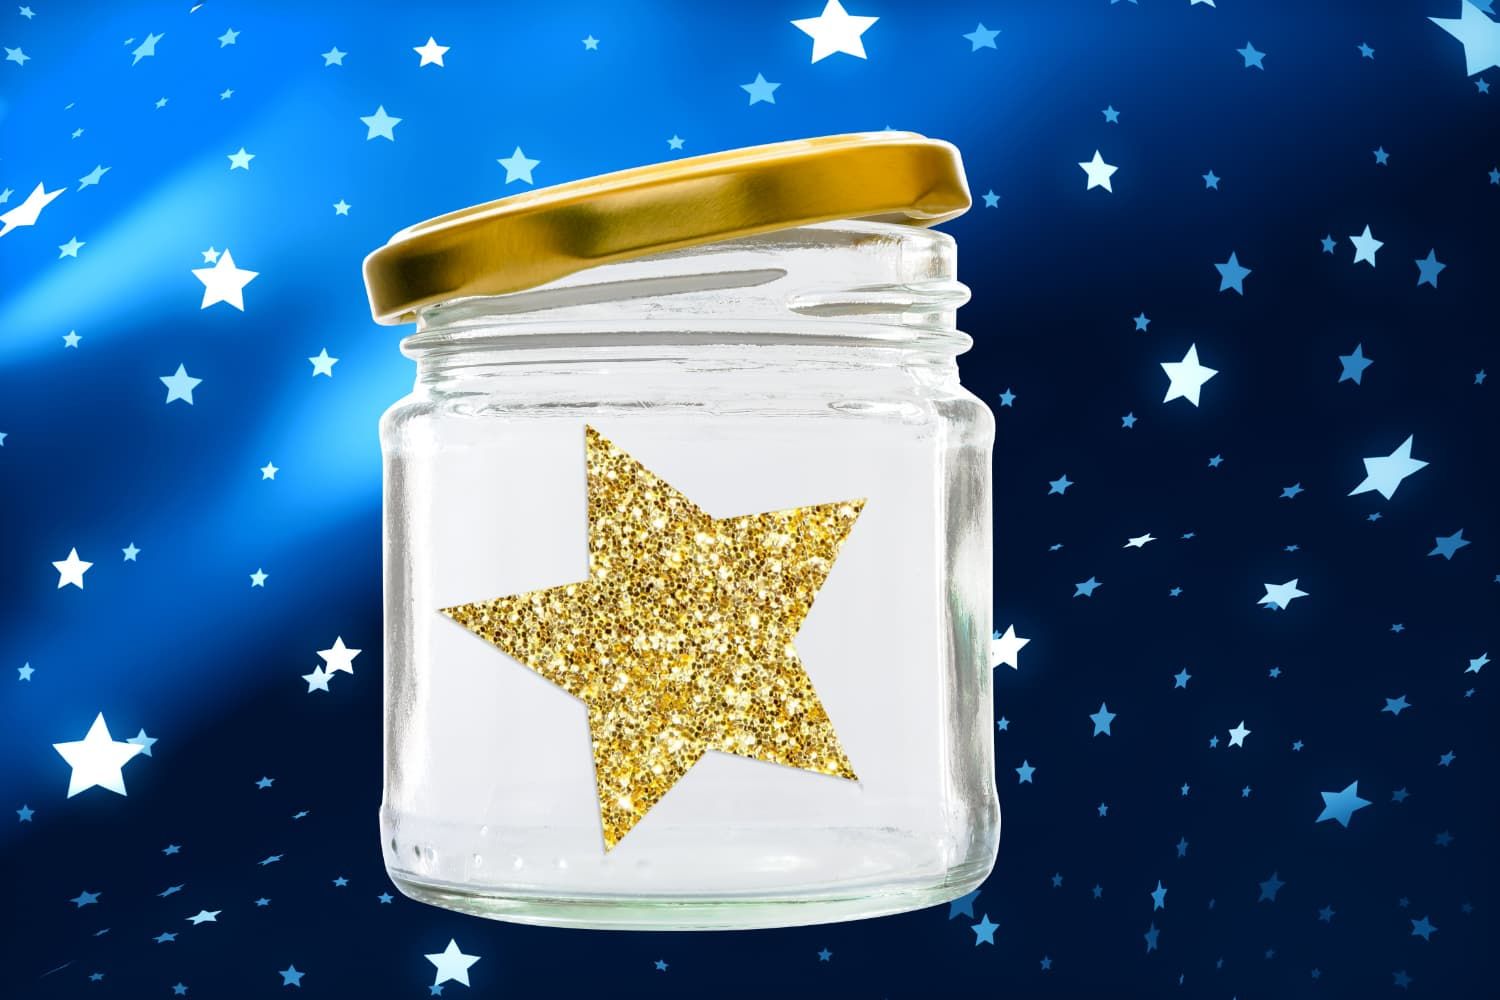 Object%20lesson%20-%20Stars%20in%20a%20jar-6132cbc5 Abraham